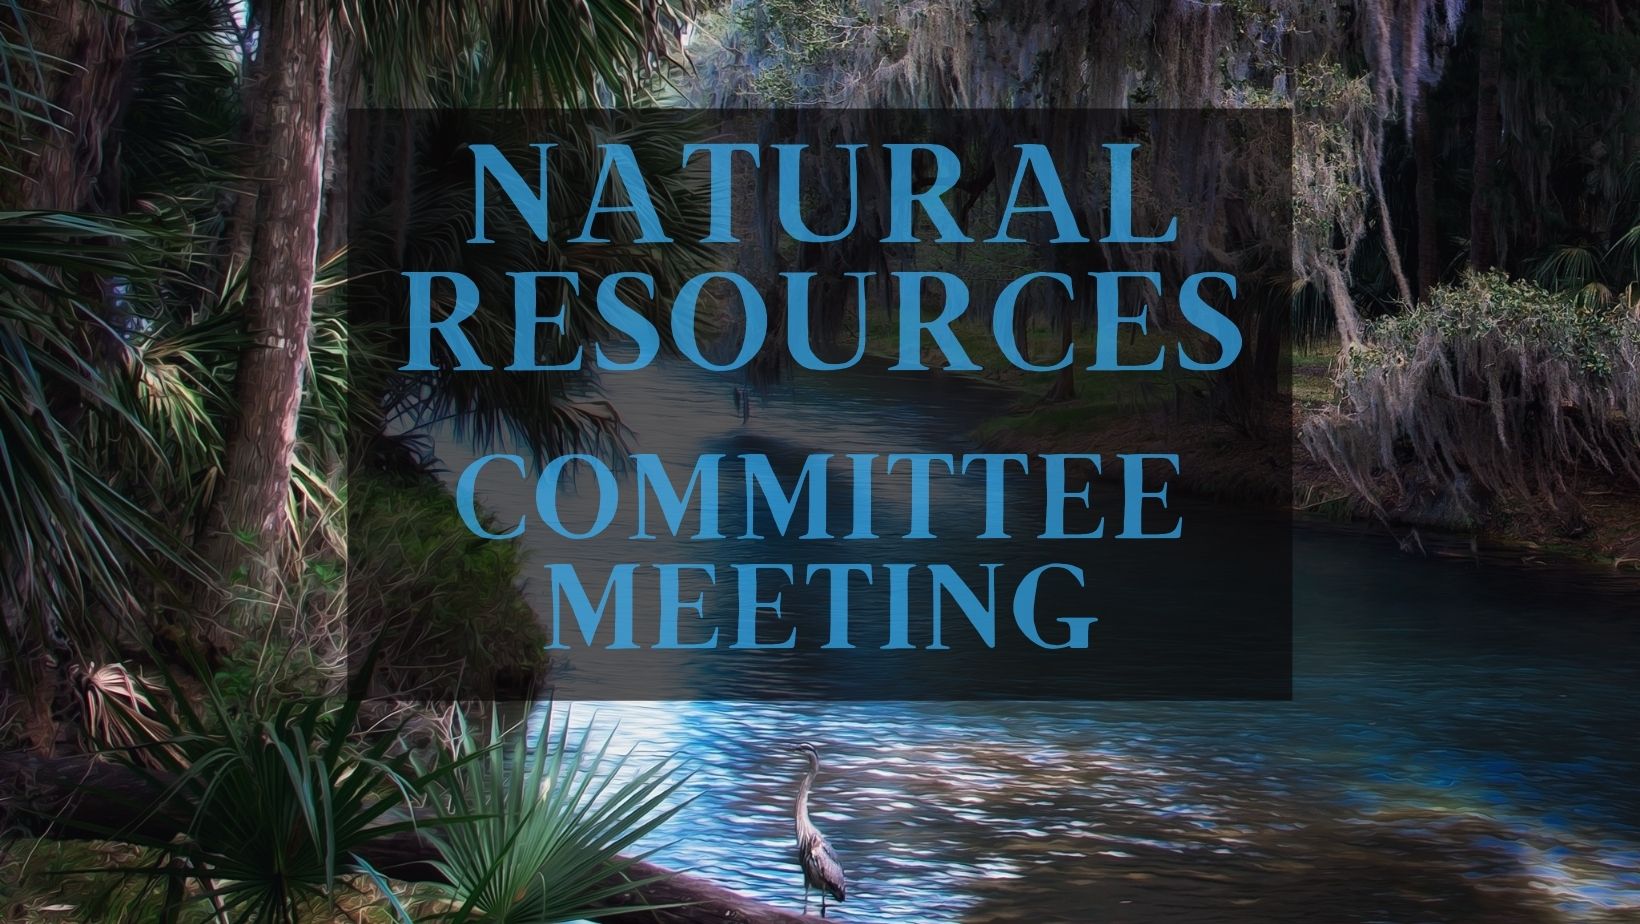 Image of springs with bird in foreground. Text overlay "Natural Resources Committee Meeting"